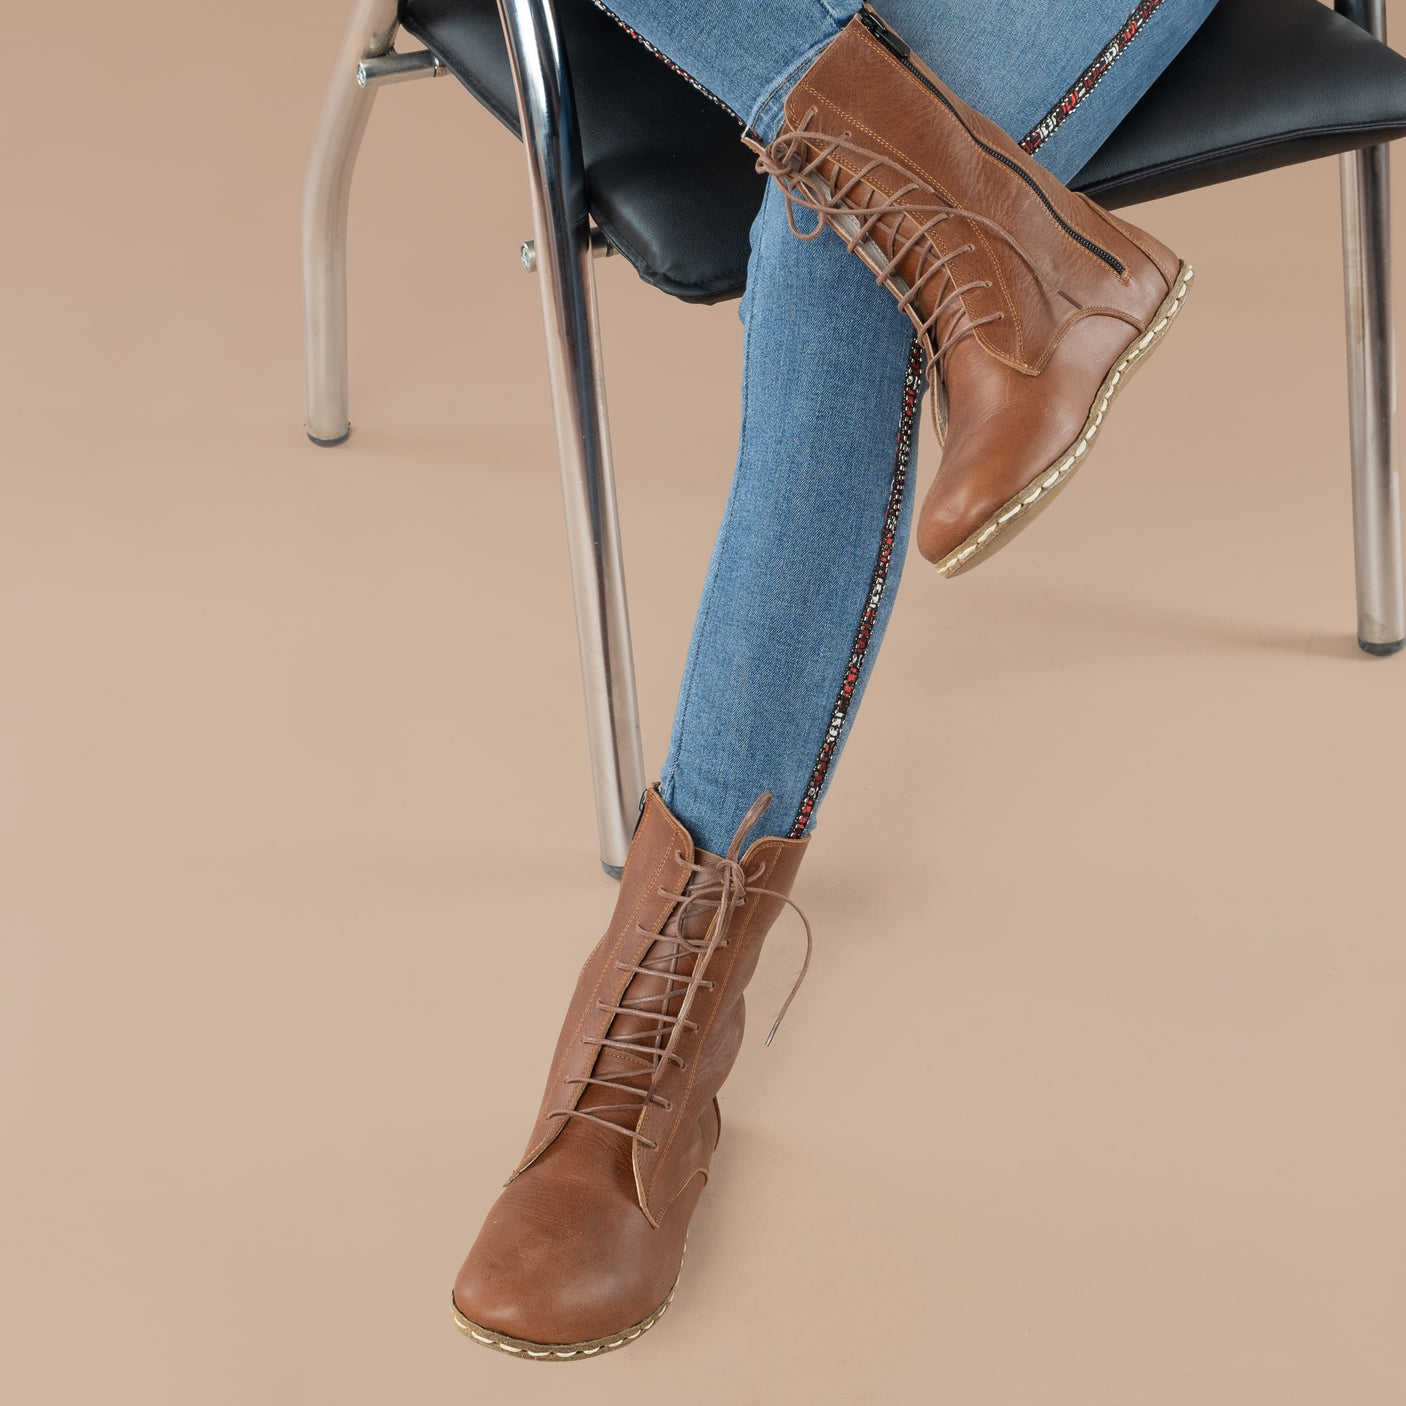 Women's Brown Barefoot High Ankle Boots